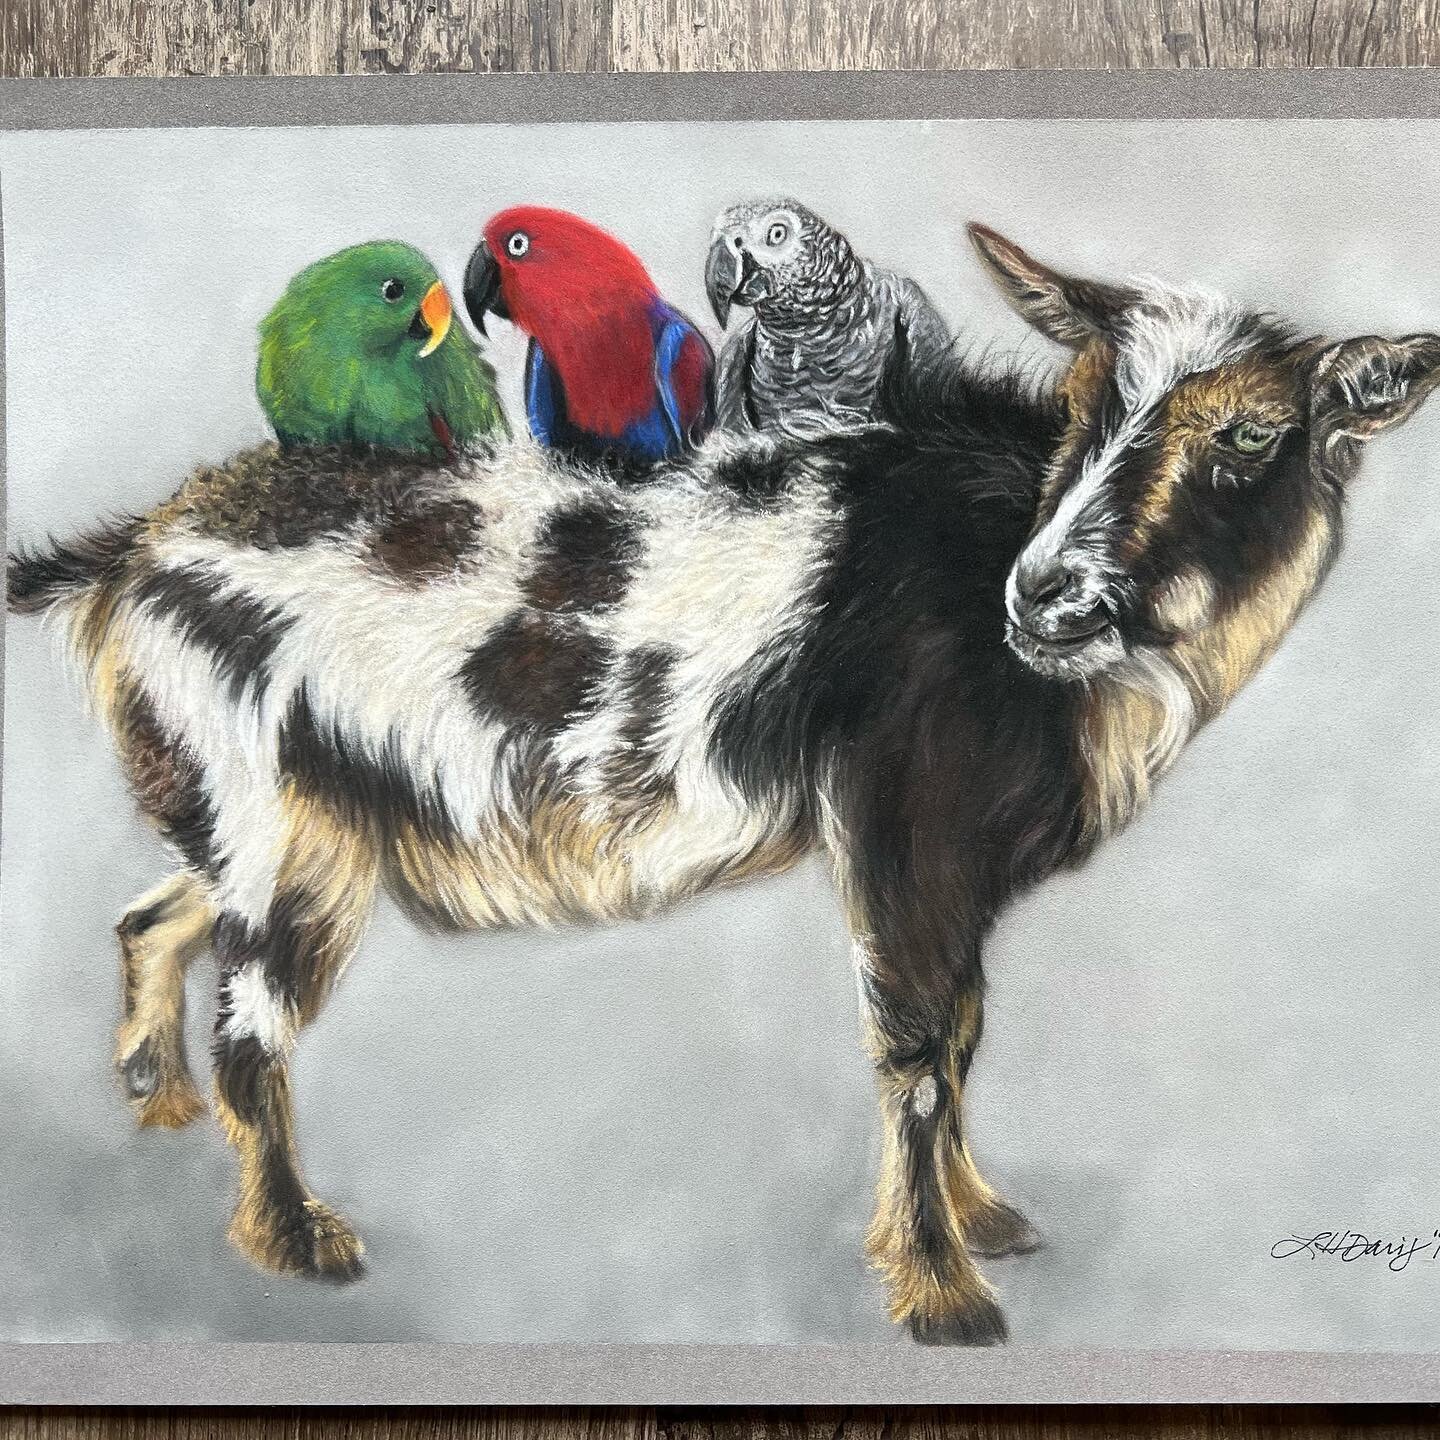 I got to surprise my sweet friend @ryan_may94 with an early Christmas gift of his OG feathered trio! From left to right - Riley, Lola, and Christian Grey all aboard Adele the goat! Ryan and his partner Nick of @hunterbrook_farms have quite the menage